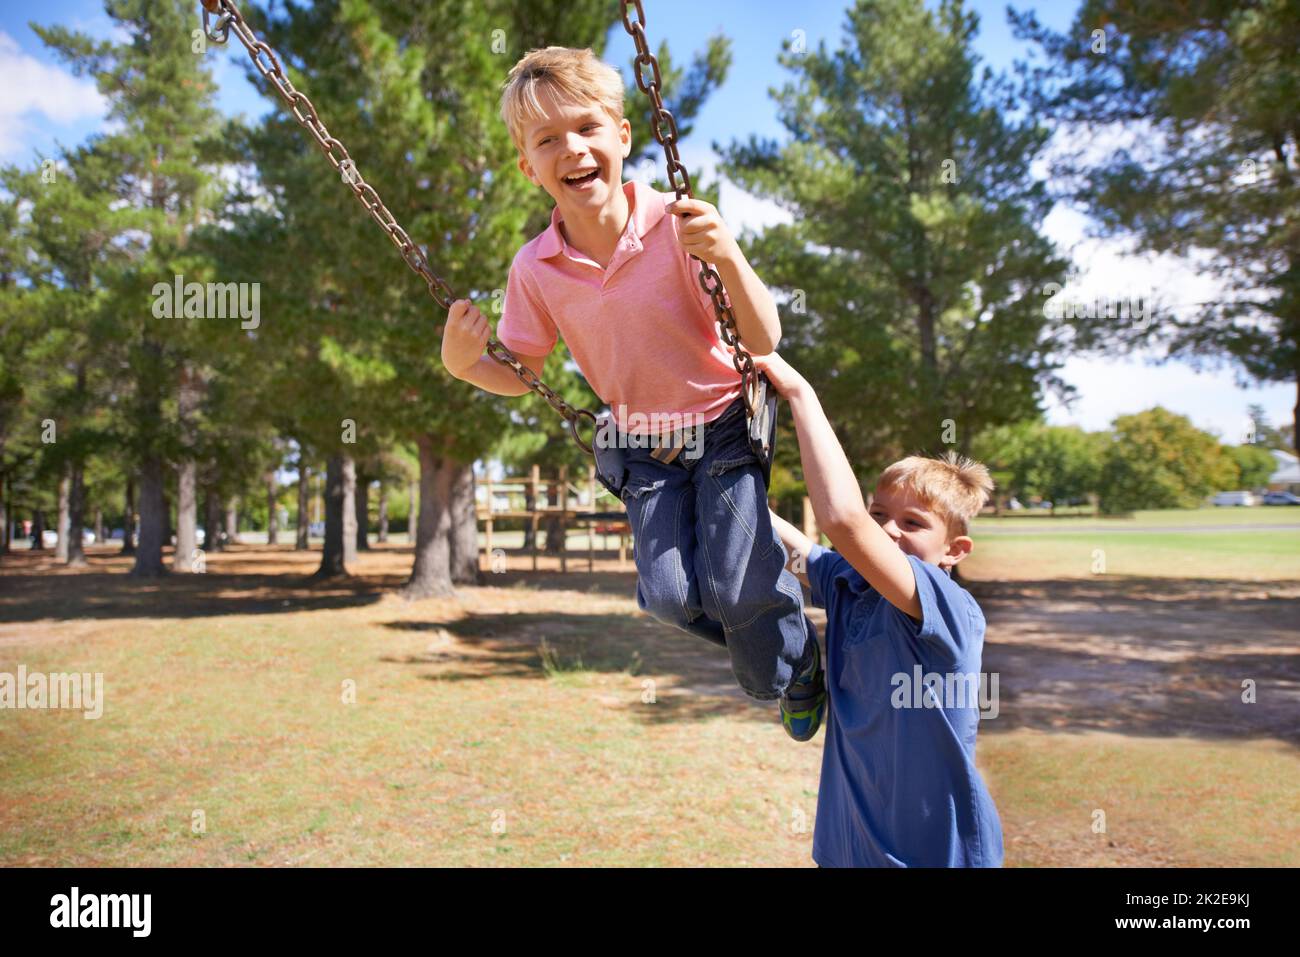 Higher and higher. A young boy enjoying the swings on the playground with friend. Stock Photo